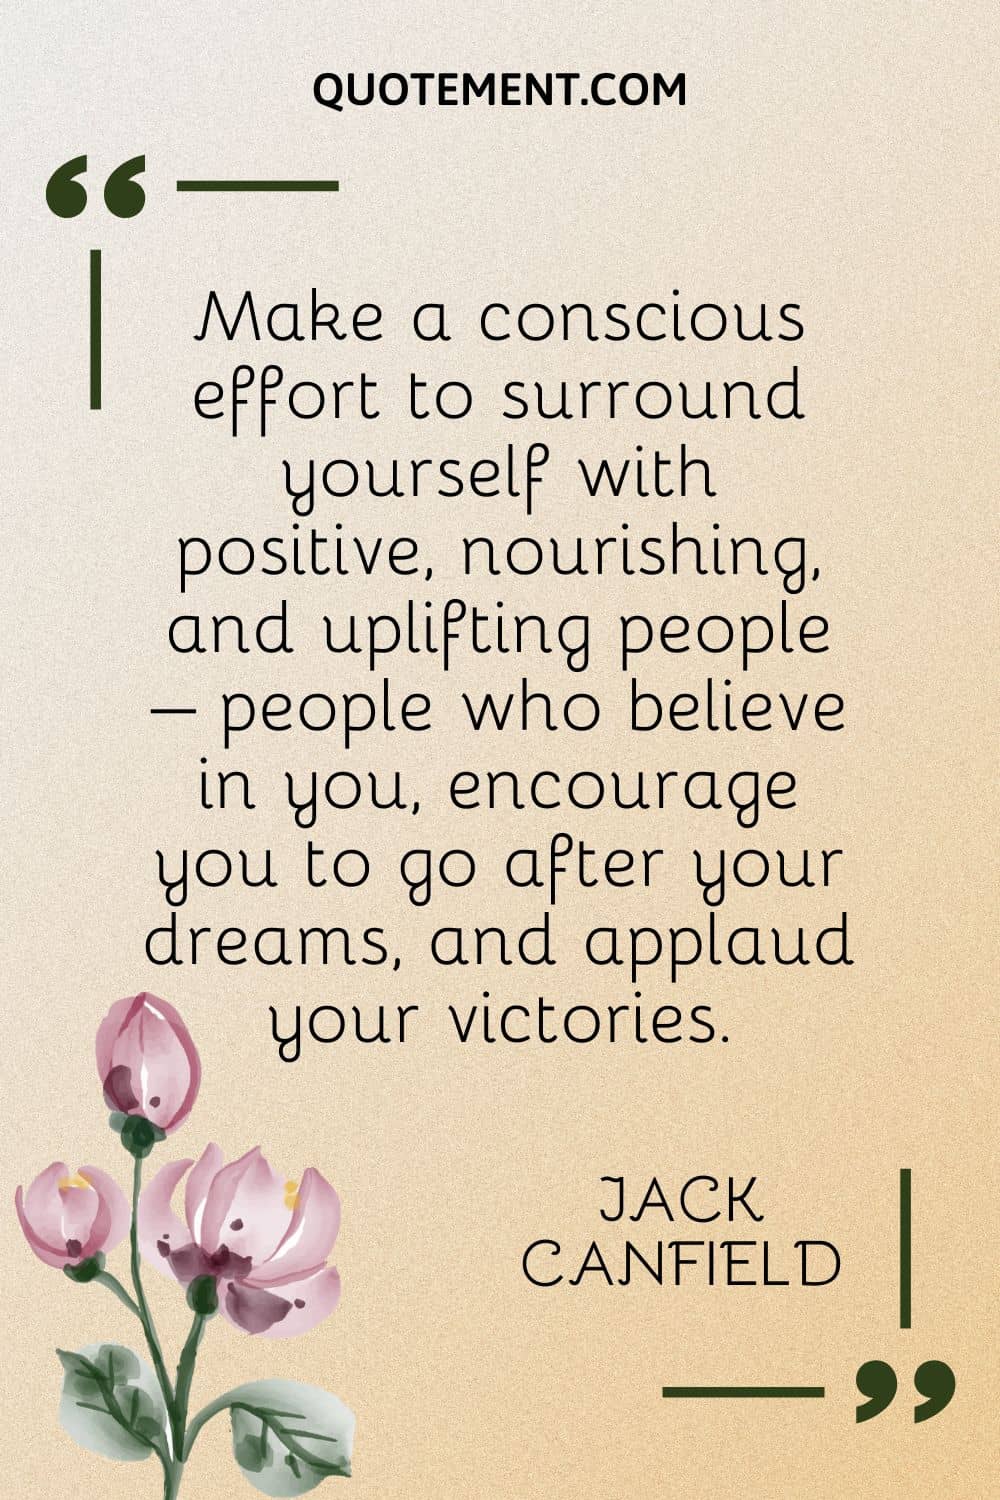 Make a conscious effort to surround yourself with positive, nourishing, and uplifting people